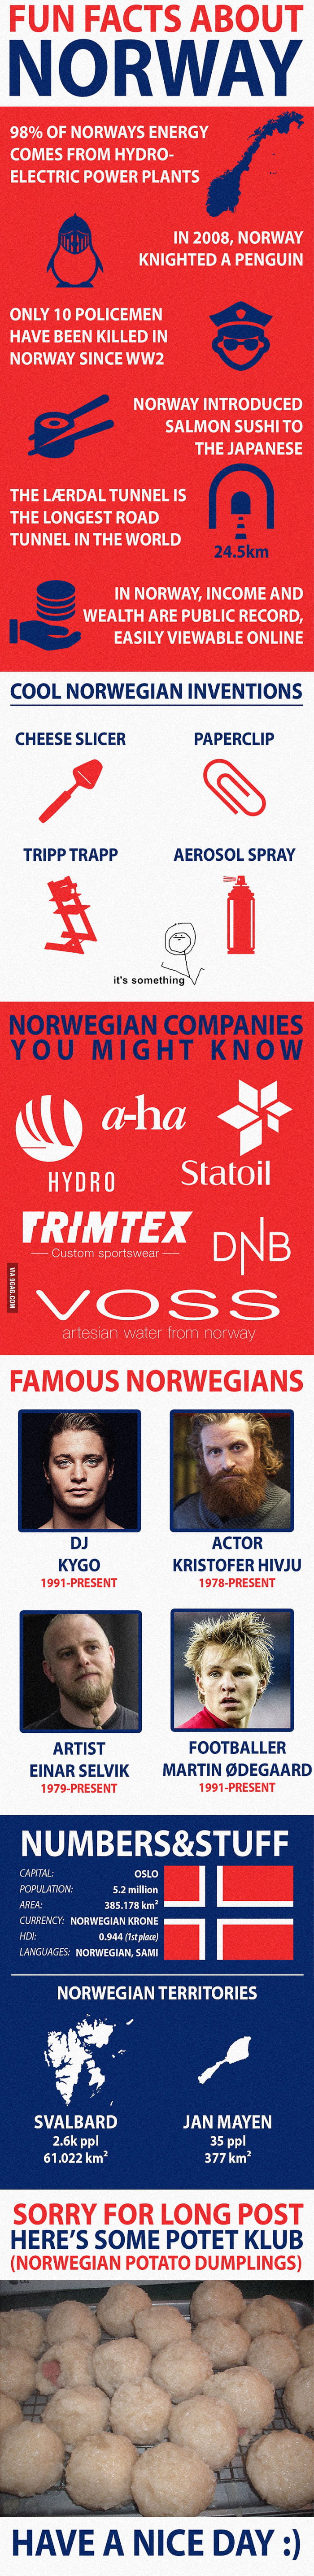 Fun Facts About Norway 9gag